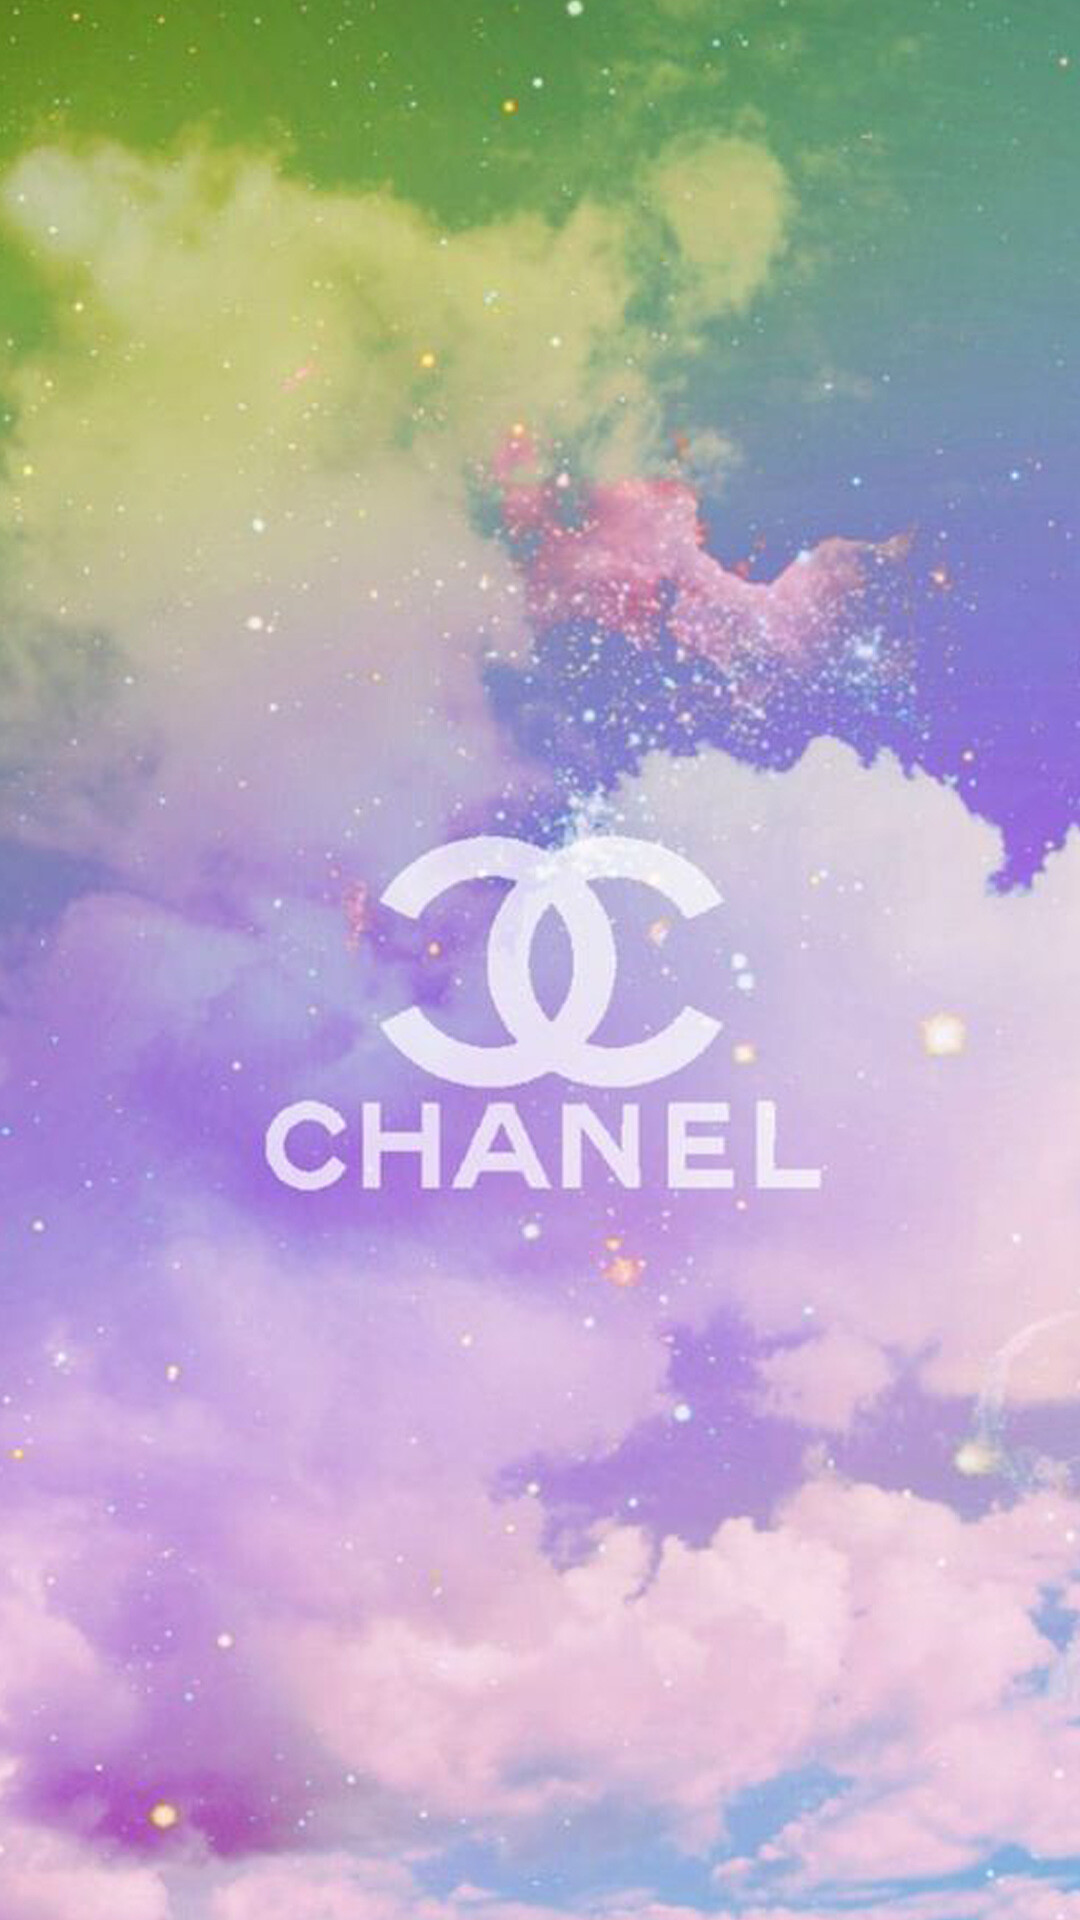 Chanel wallpaper collection, Premium fashion, High-quality images, Elegant style, 1080x1920 Full HD Phone